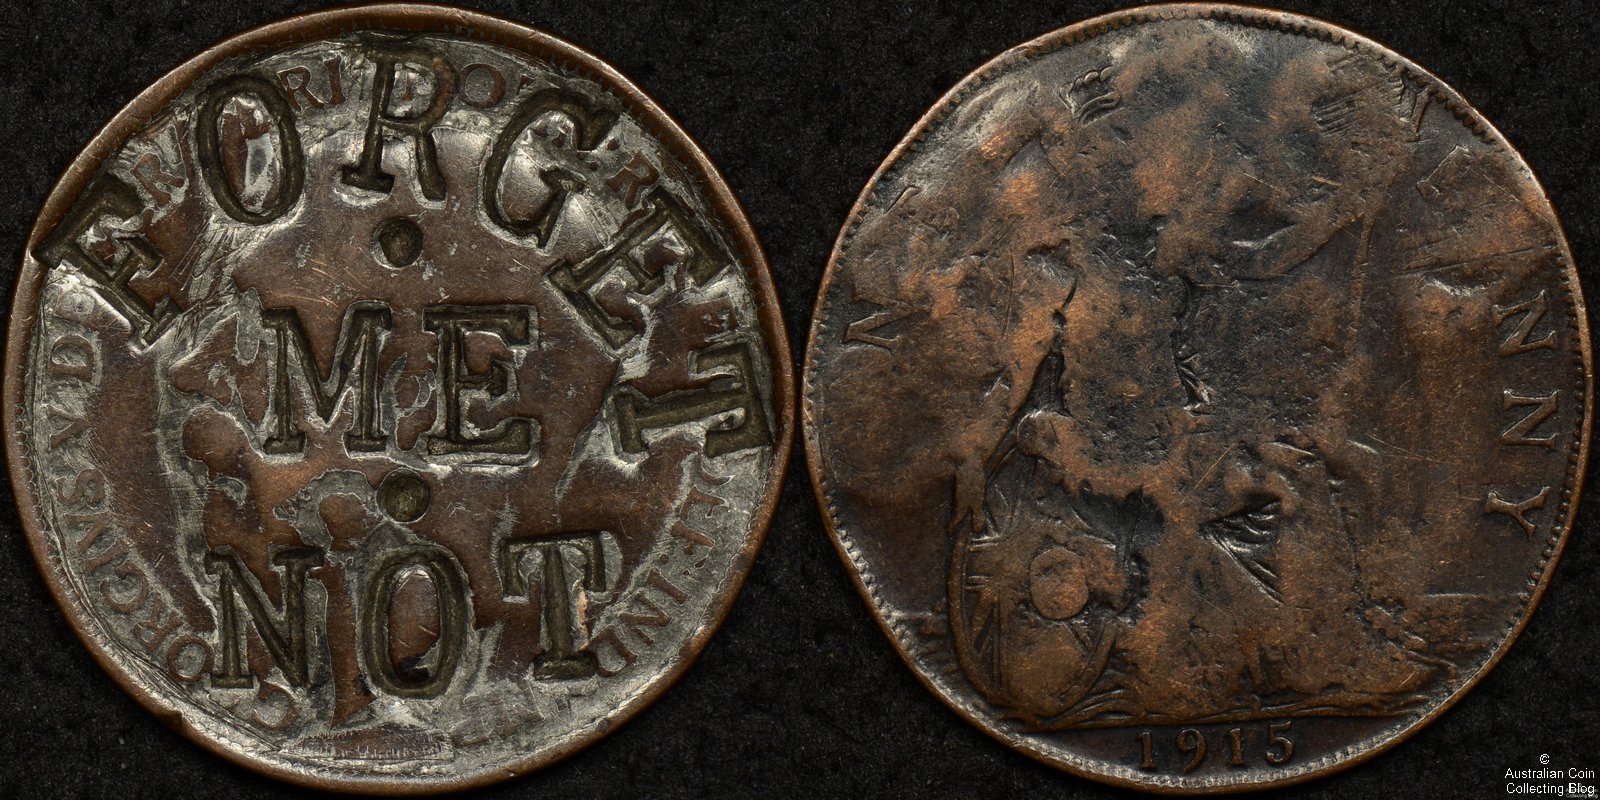 Probably WW1 Forget Me Not Penny on 1915 British Penny